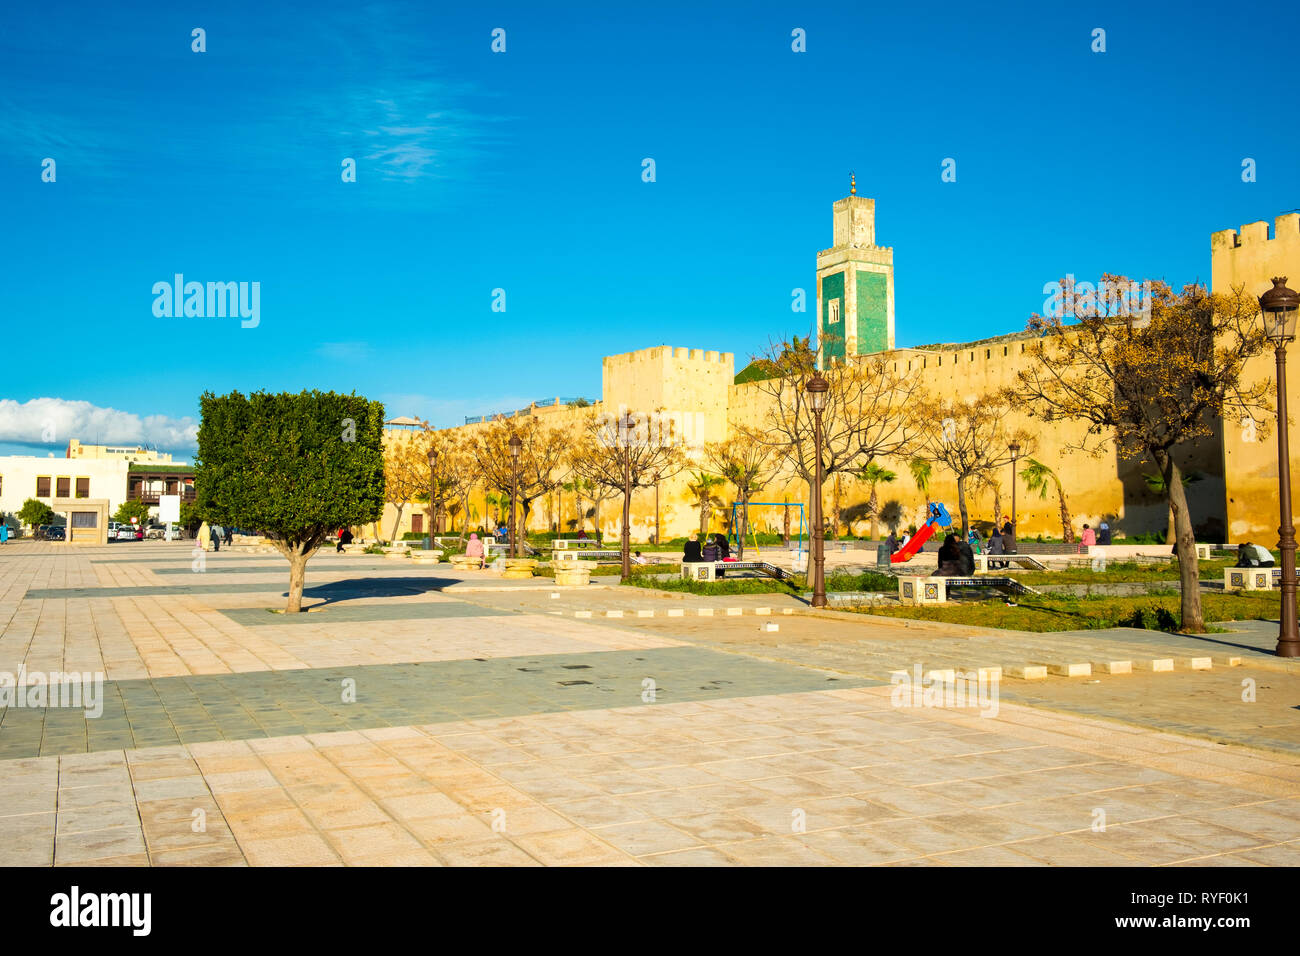 Outer wall of Imperial Palace at Place Lalla Aouda in Meknes, Morocco. Horizontal Stock Photo